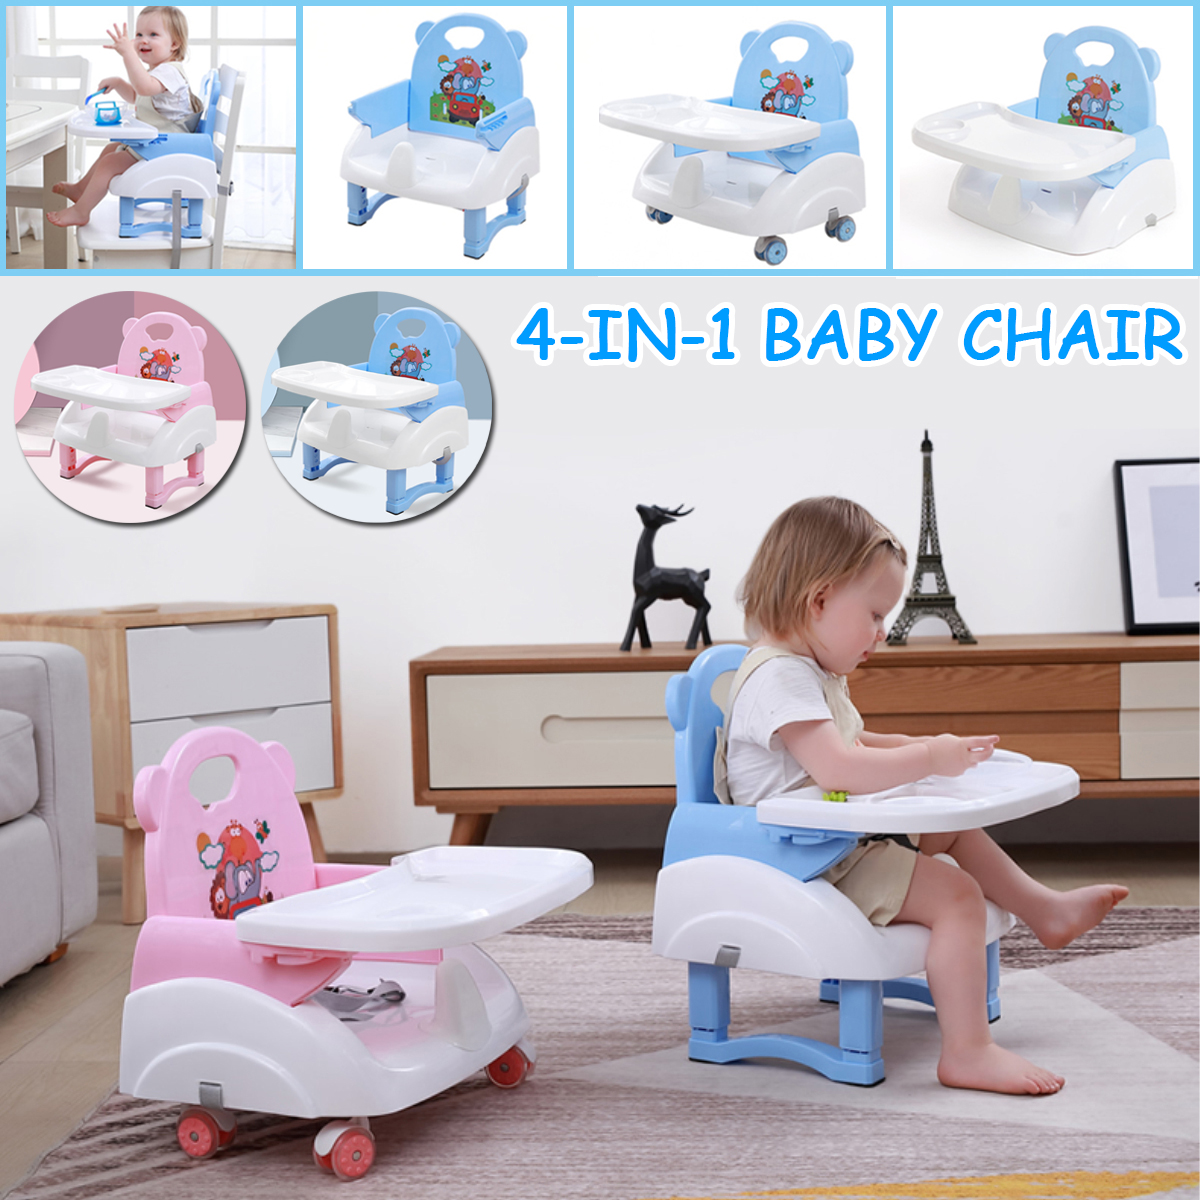 4-in1-Adjustable-Baby-Chairs-Feeding-Dining-Table-Seat-Belt-Dinner-Plate-Mat-1798948-1